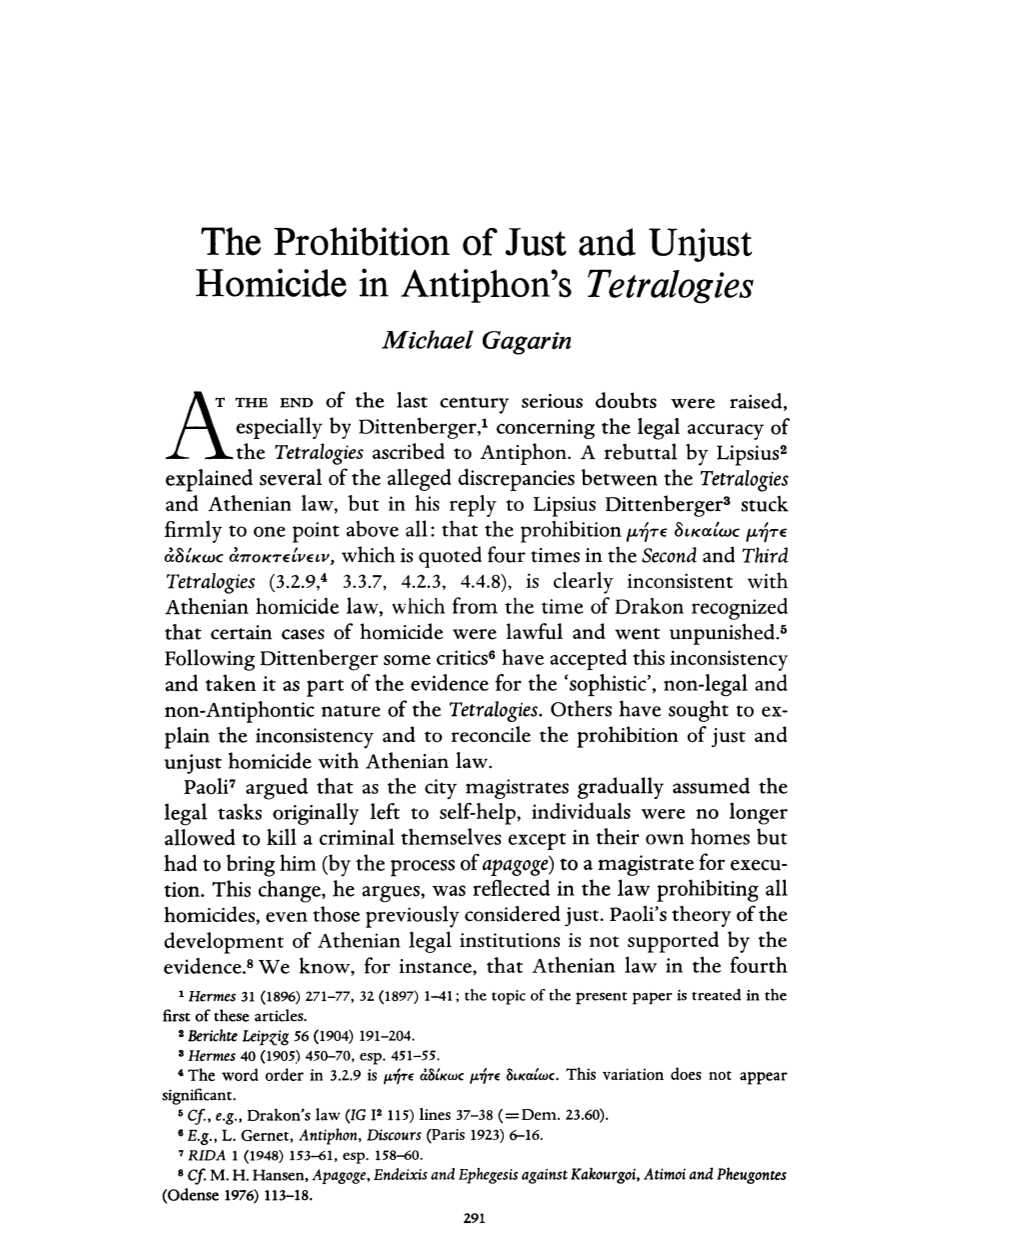 The Prohibition of Just and Unjust Homicide in Antiphon's Tetralogies Michael Gagarin